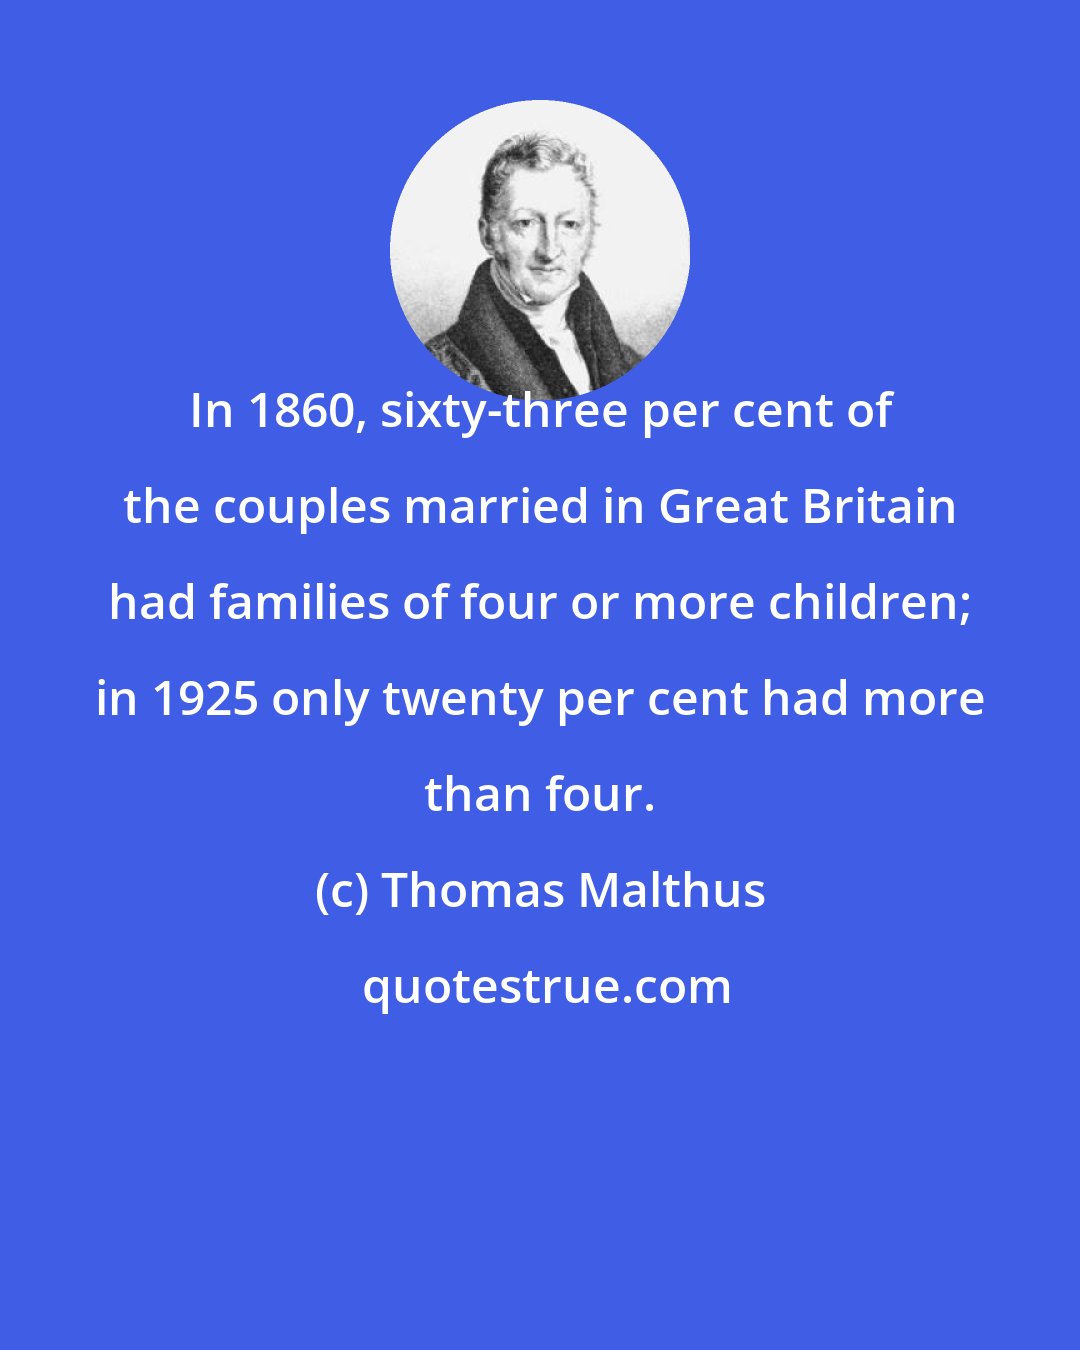 Thomas Malthus: In 1860, sixty-three per cent of the couples married in Great Britain had families of four or more children; in 1925 only twenty per cent had more than four.